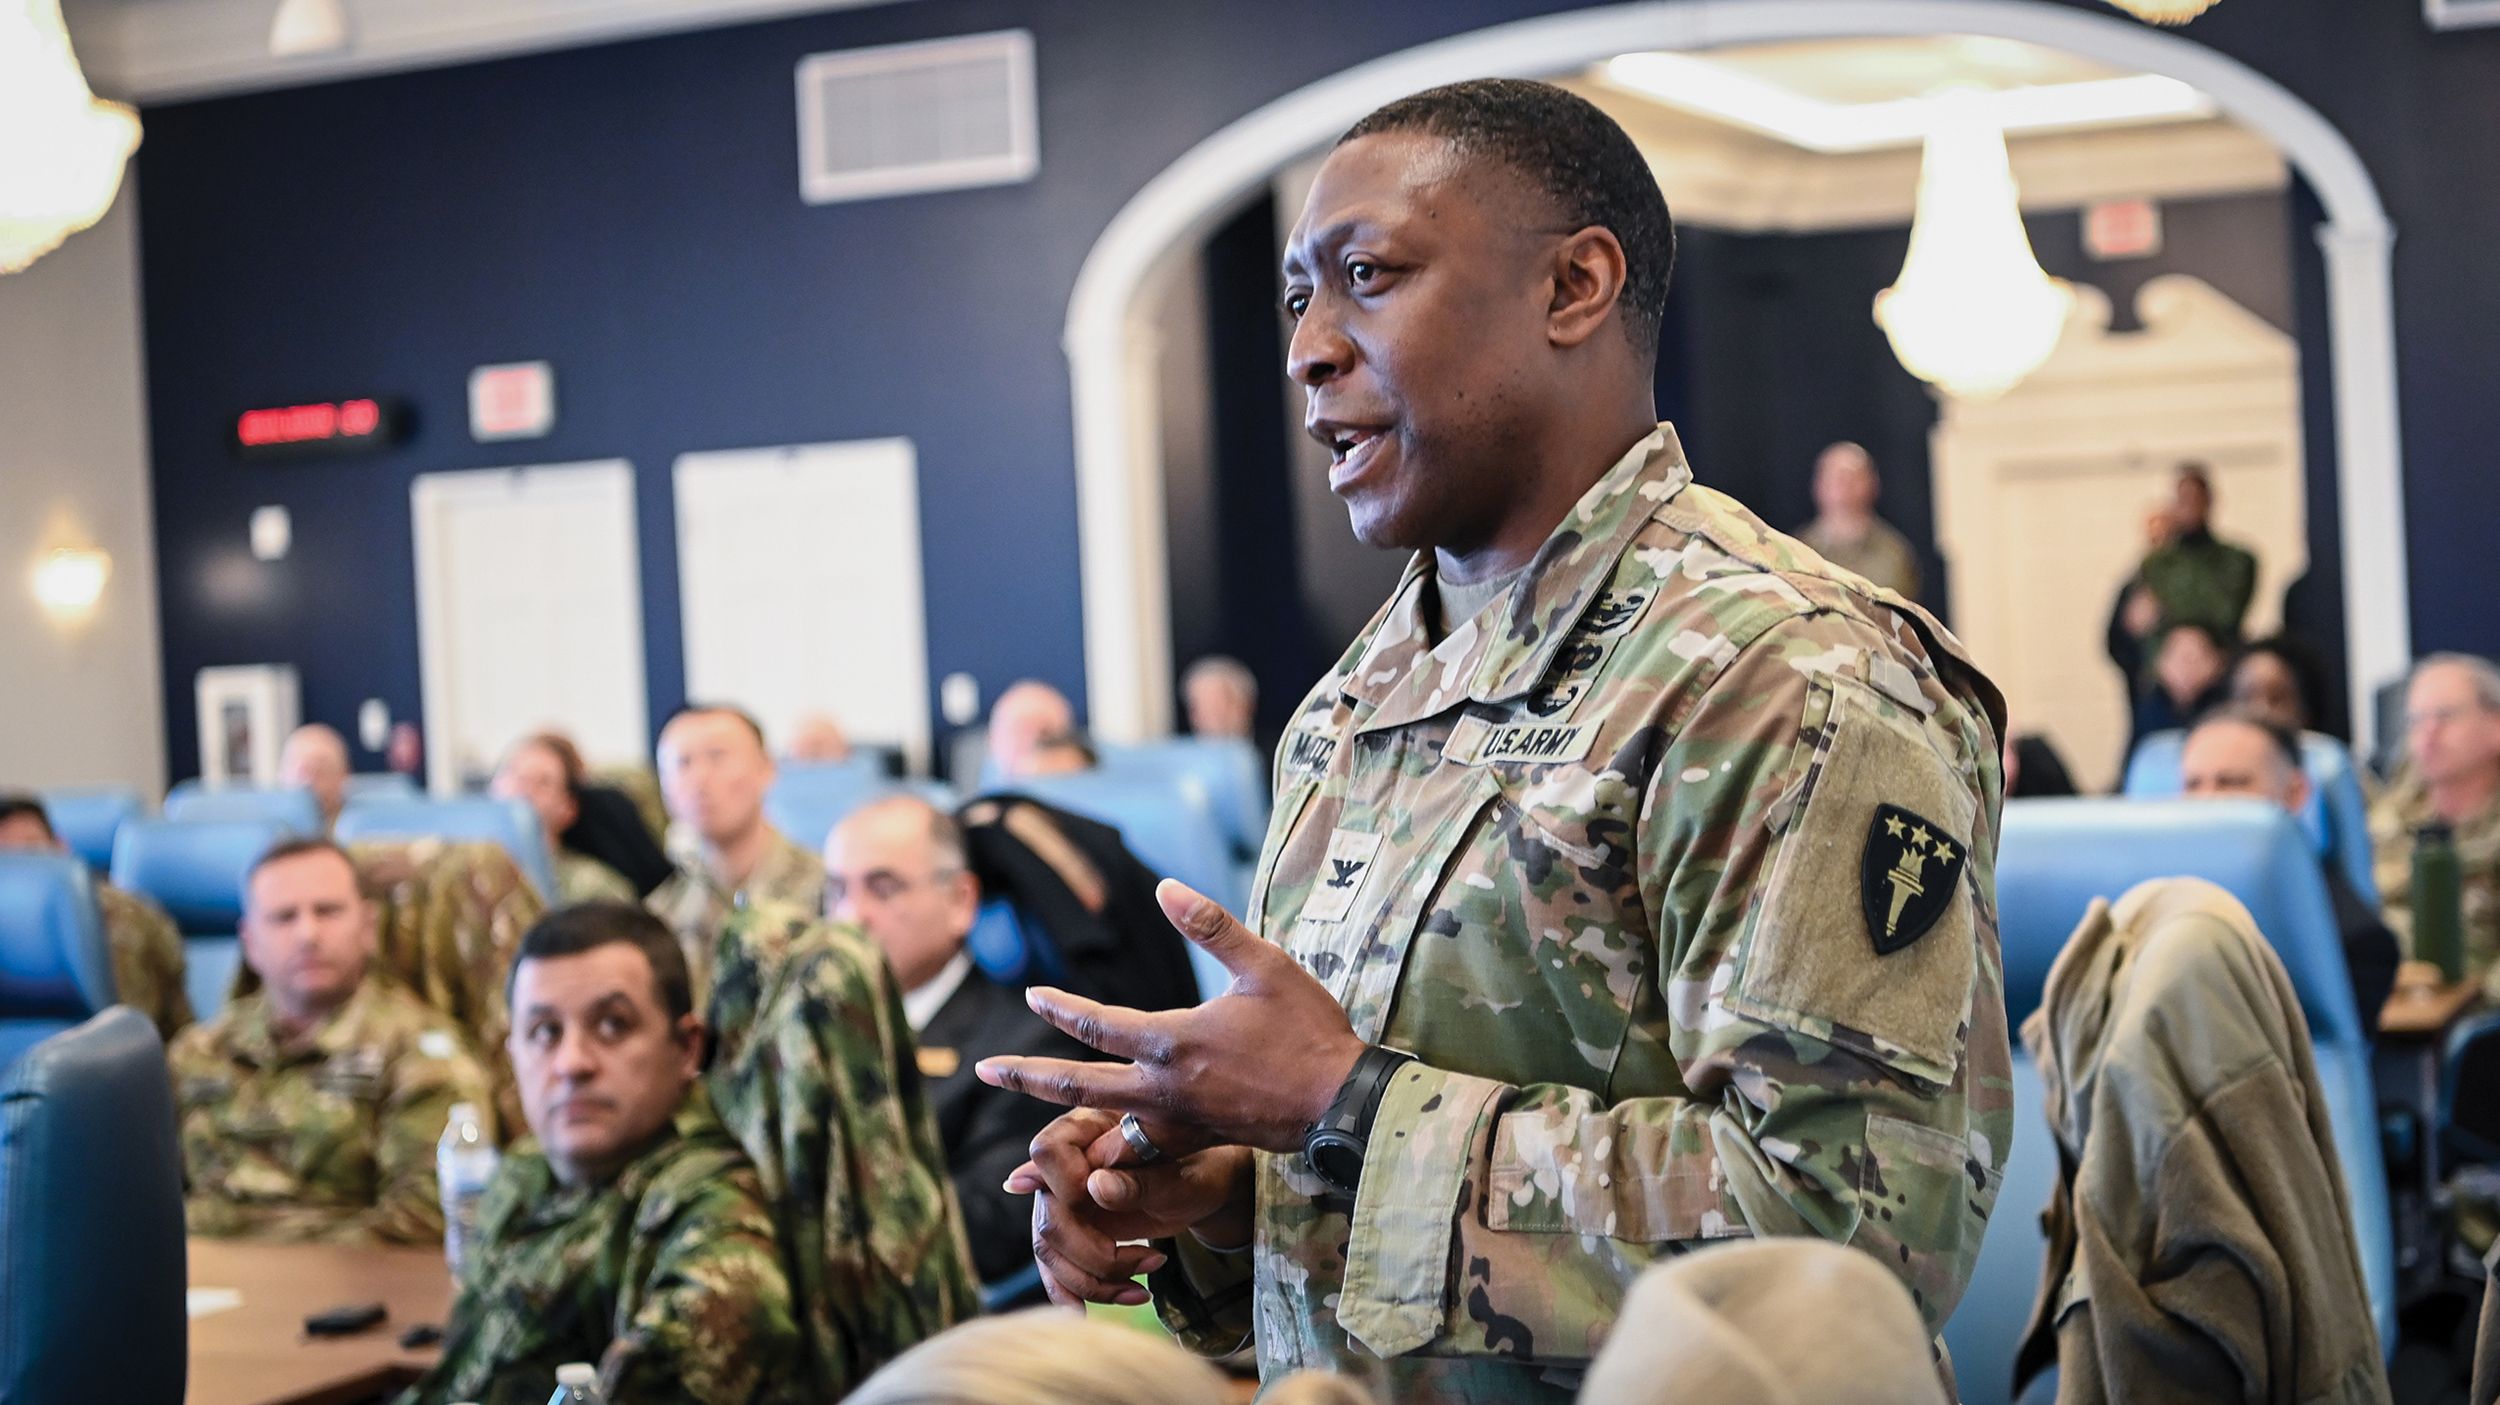 Army Major General James E. Taylor, Inter-American Defense College director, speaks to Army War College students at National Defense University, Fort Lesley J. McNair, Washington, DC